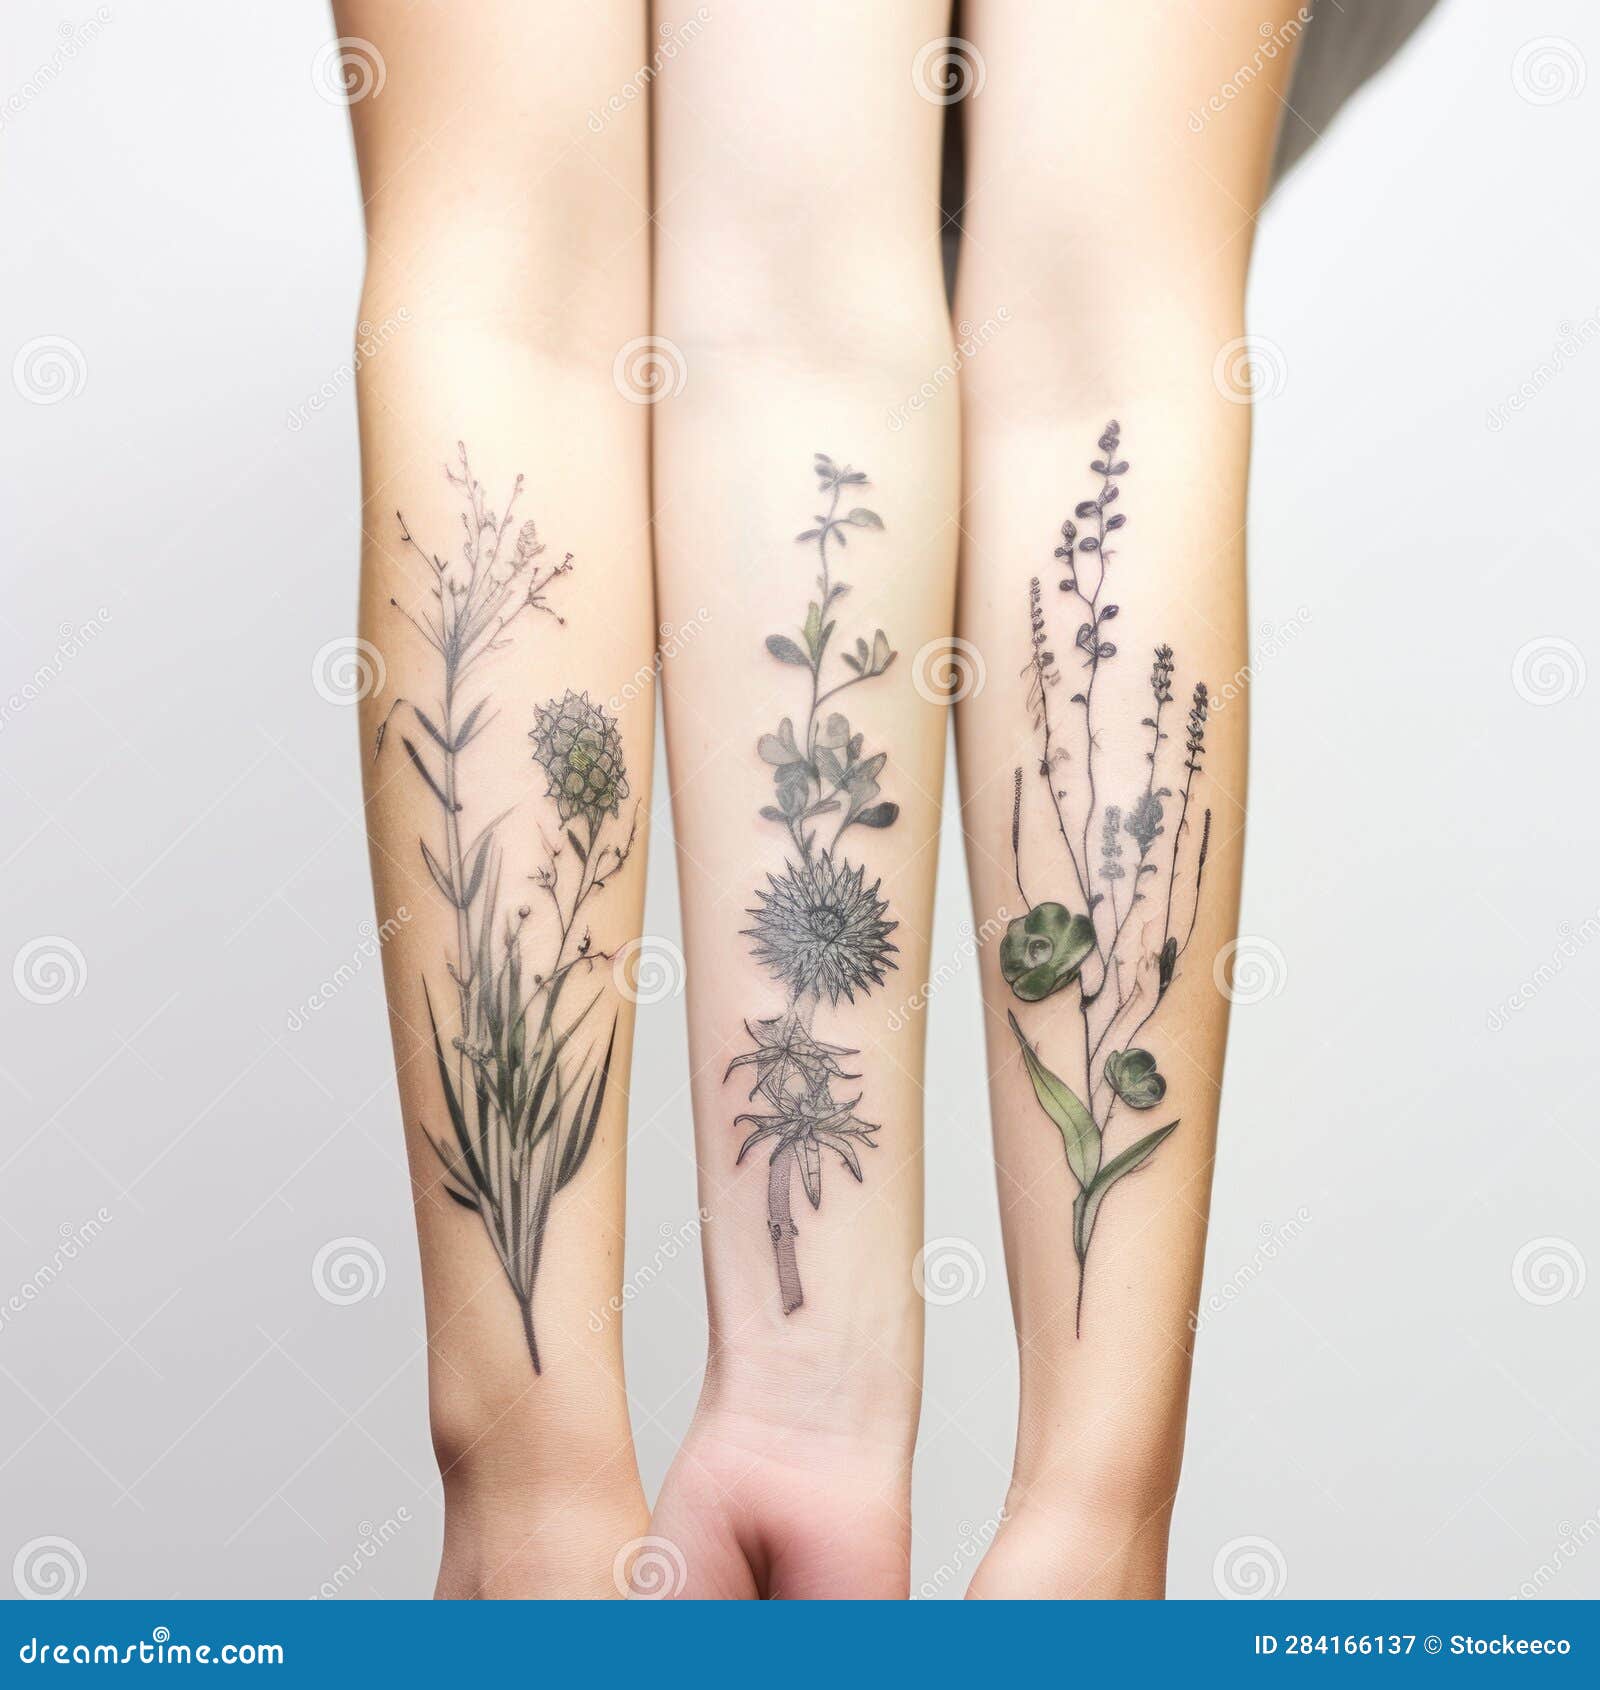 30 Best Full Arm Tattoo Ideas You Should Check